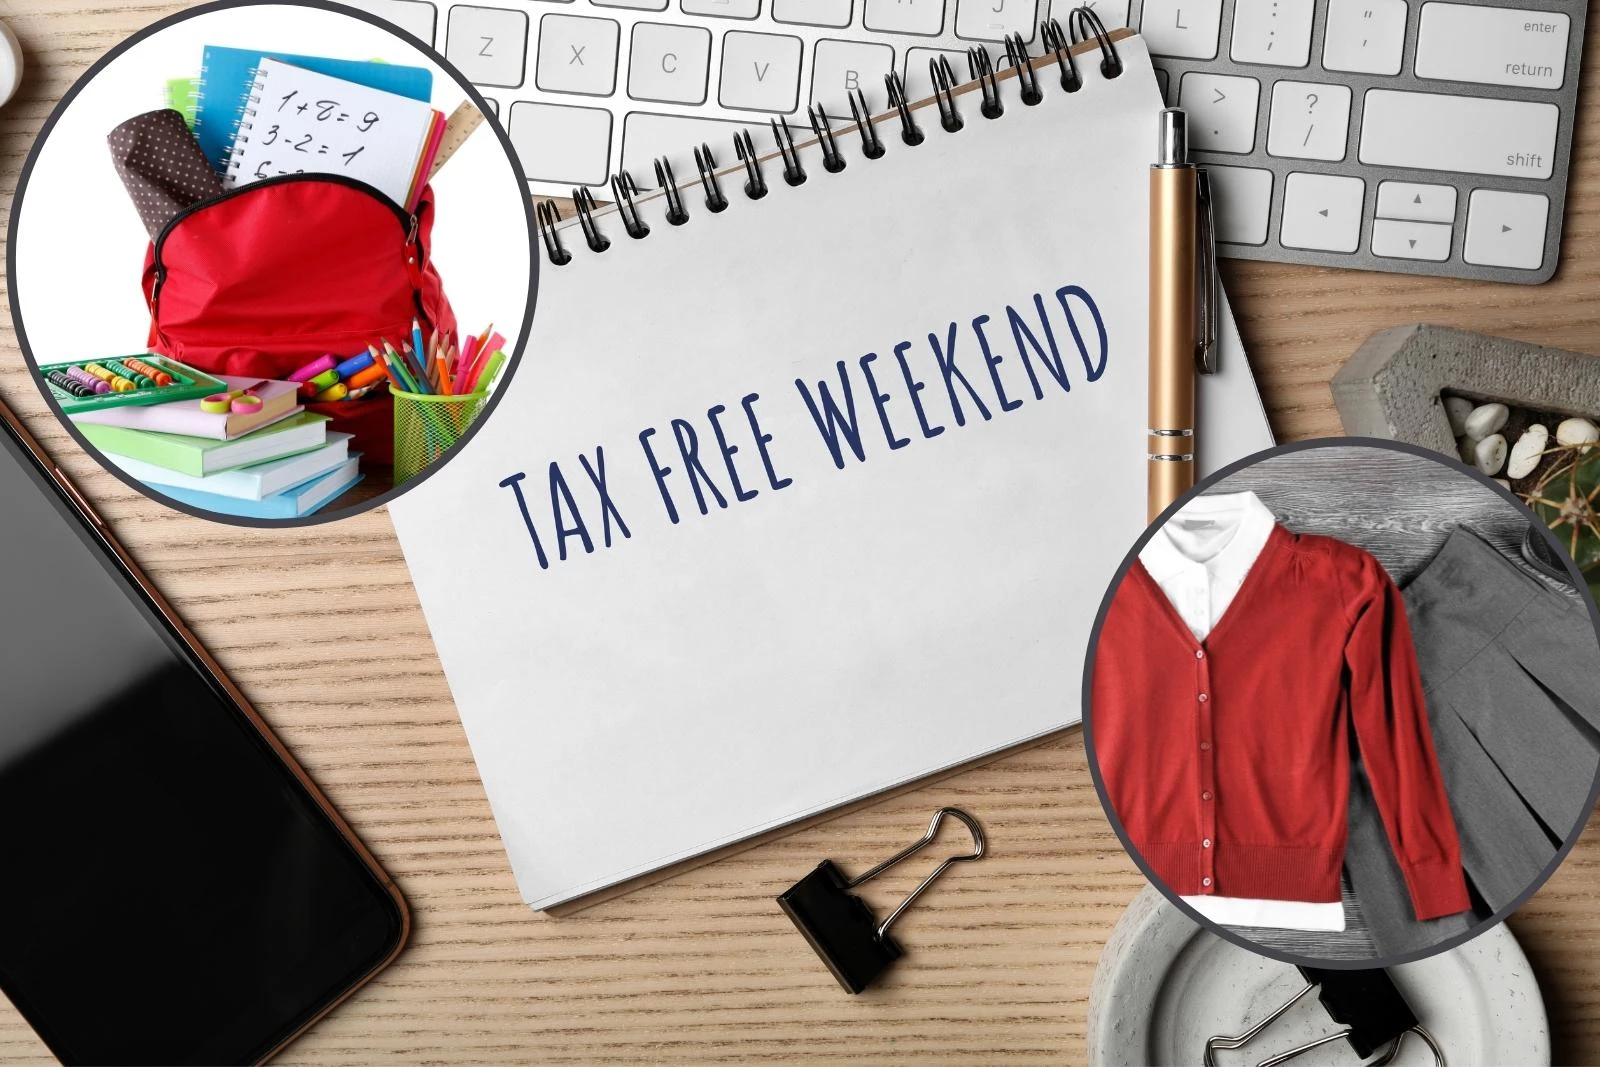 What You Need to Know to Save Big on Tax Free Weekend August 1719 [POLL]